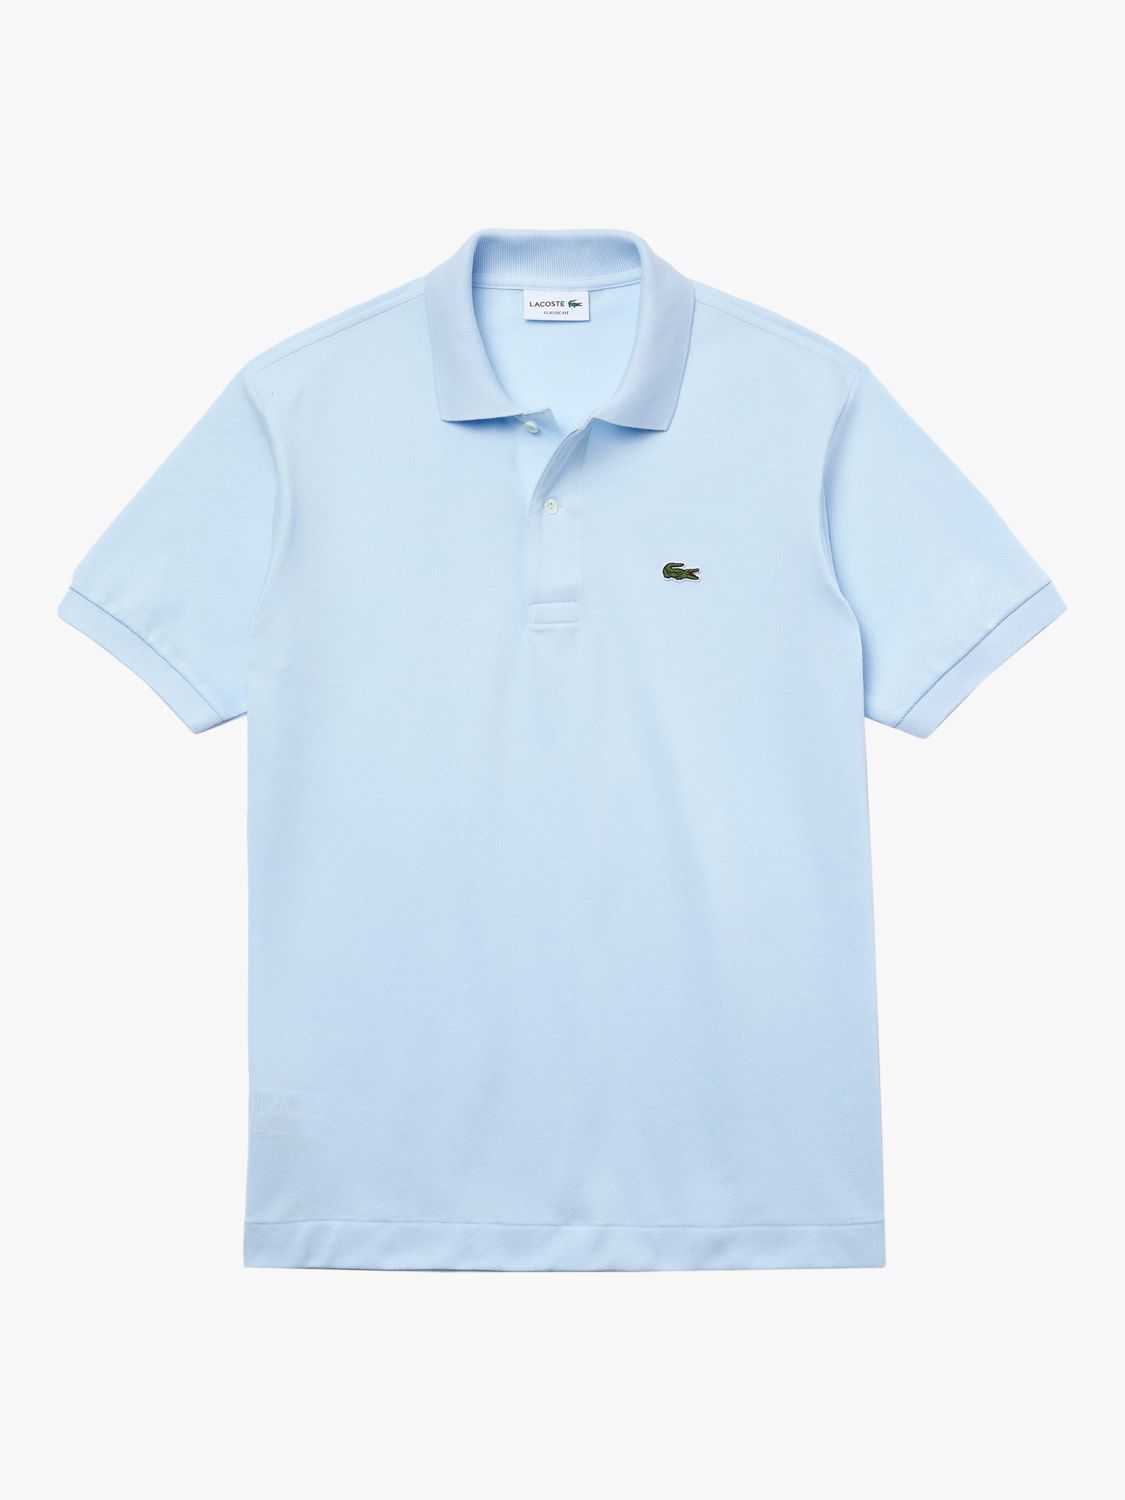 lacoste classic fit polo shirt